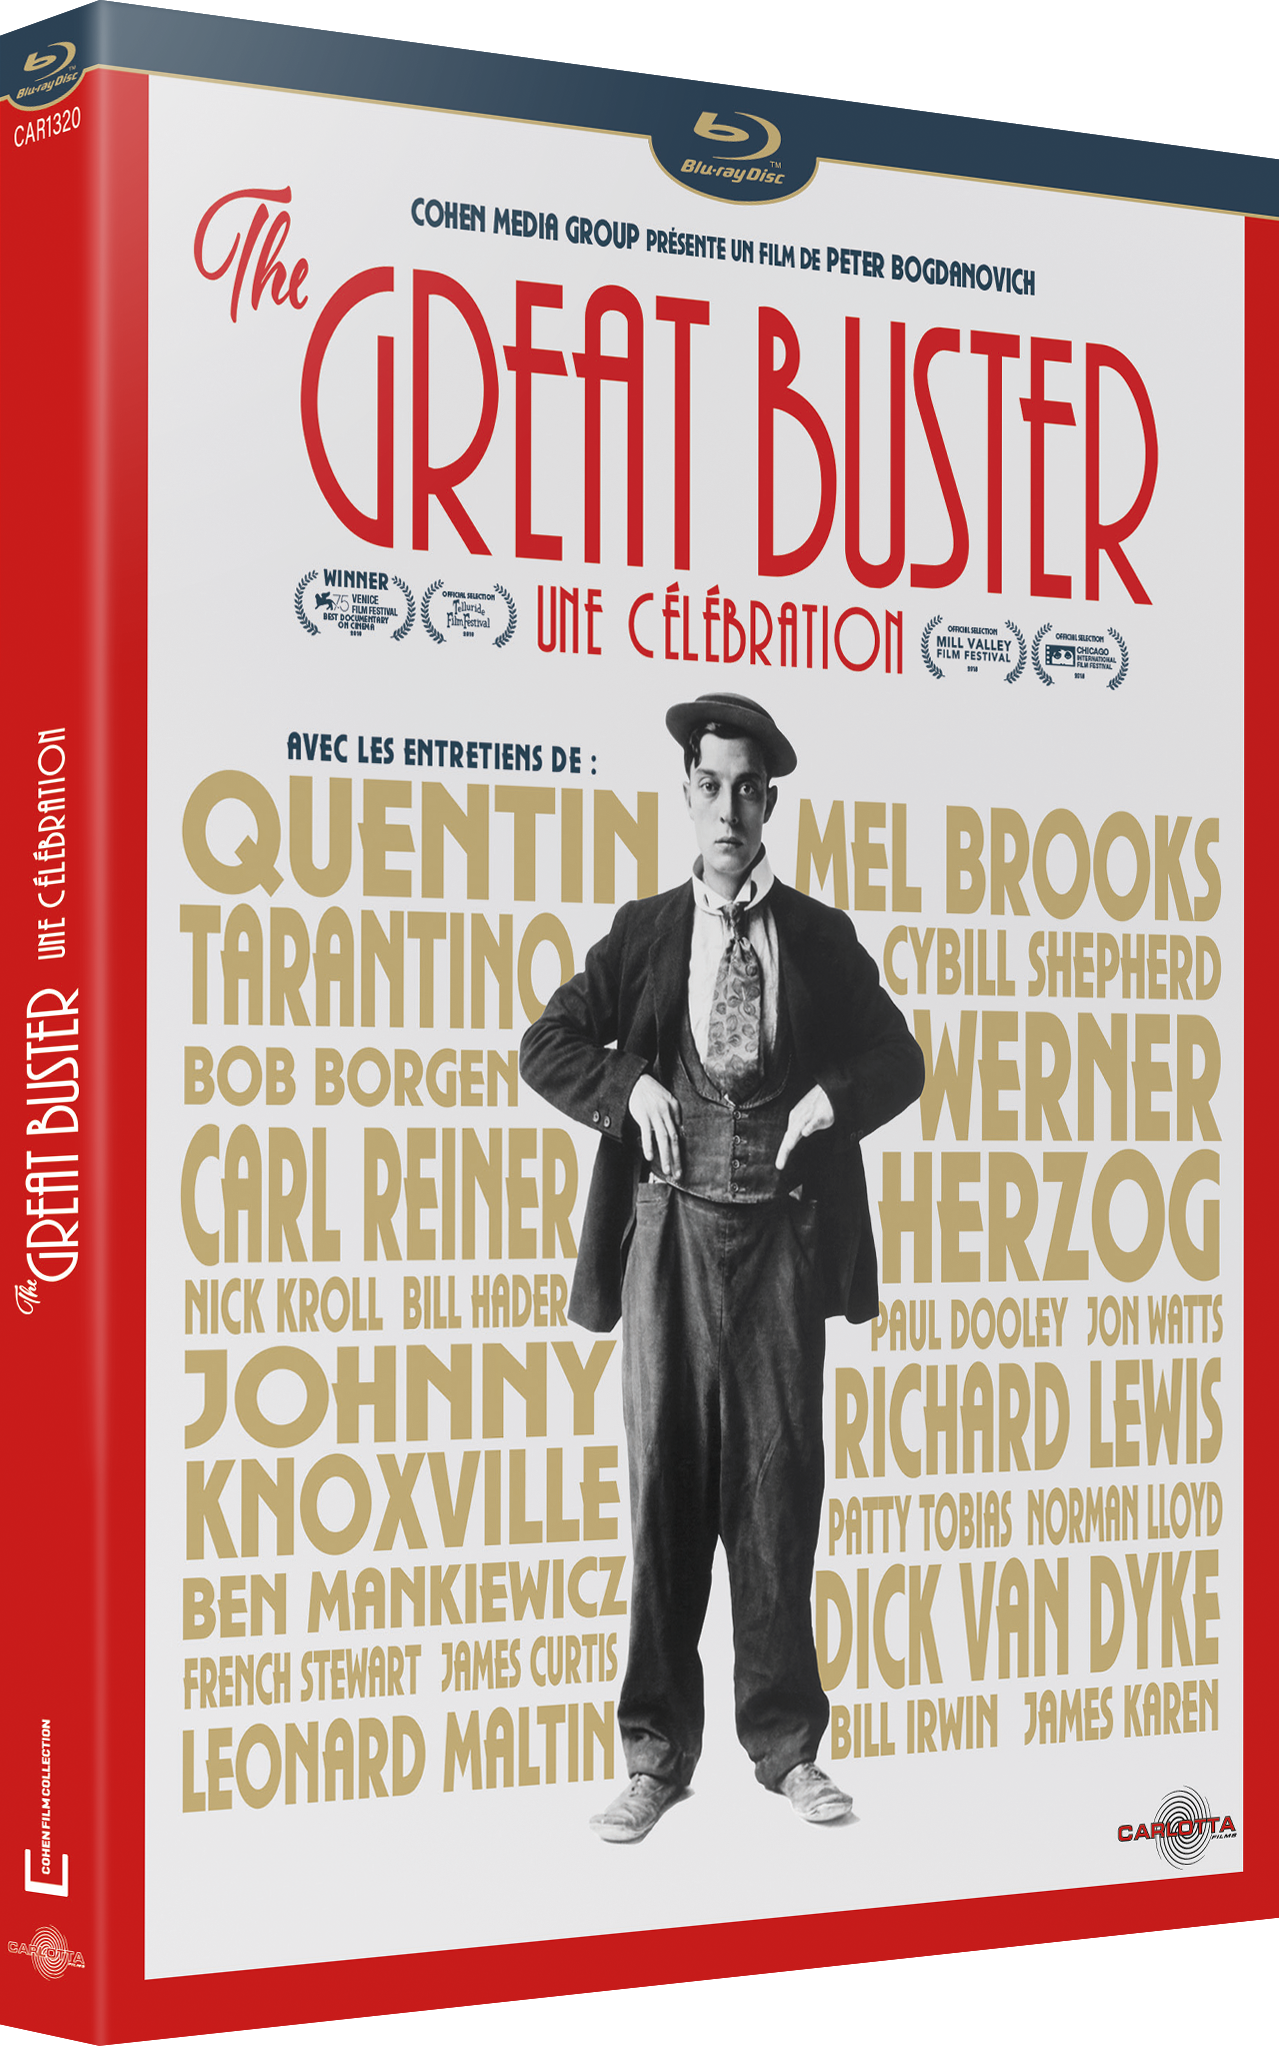 The Great Buster: A Celebration of Peter Bogdanovich